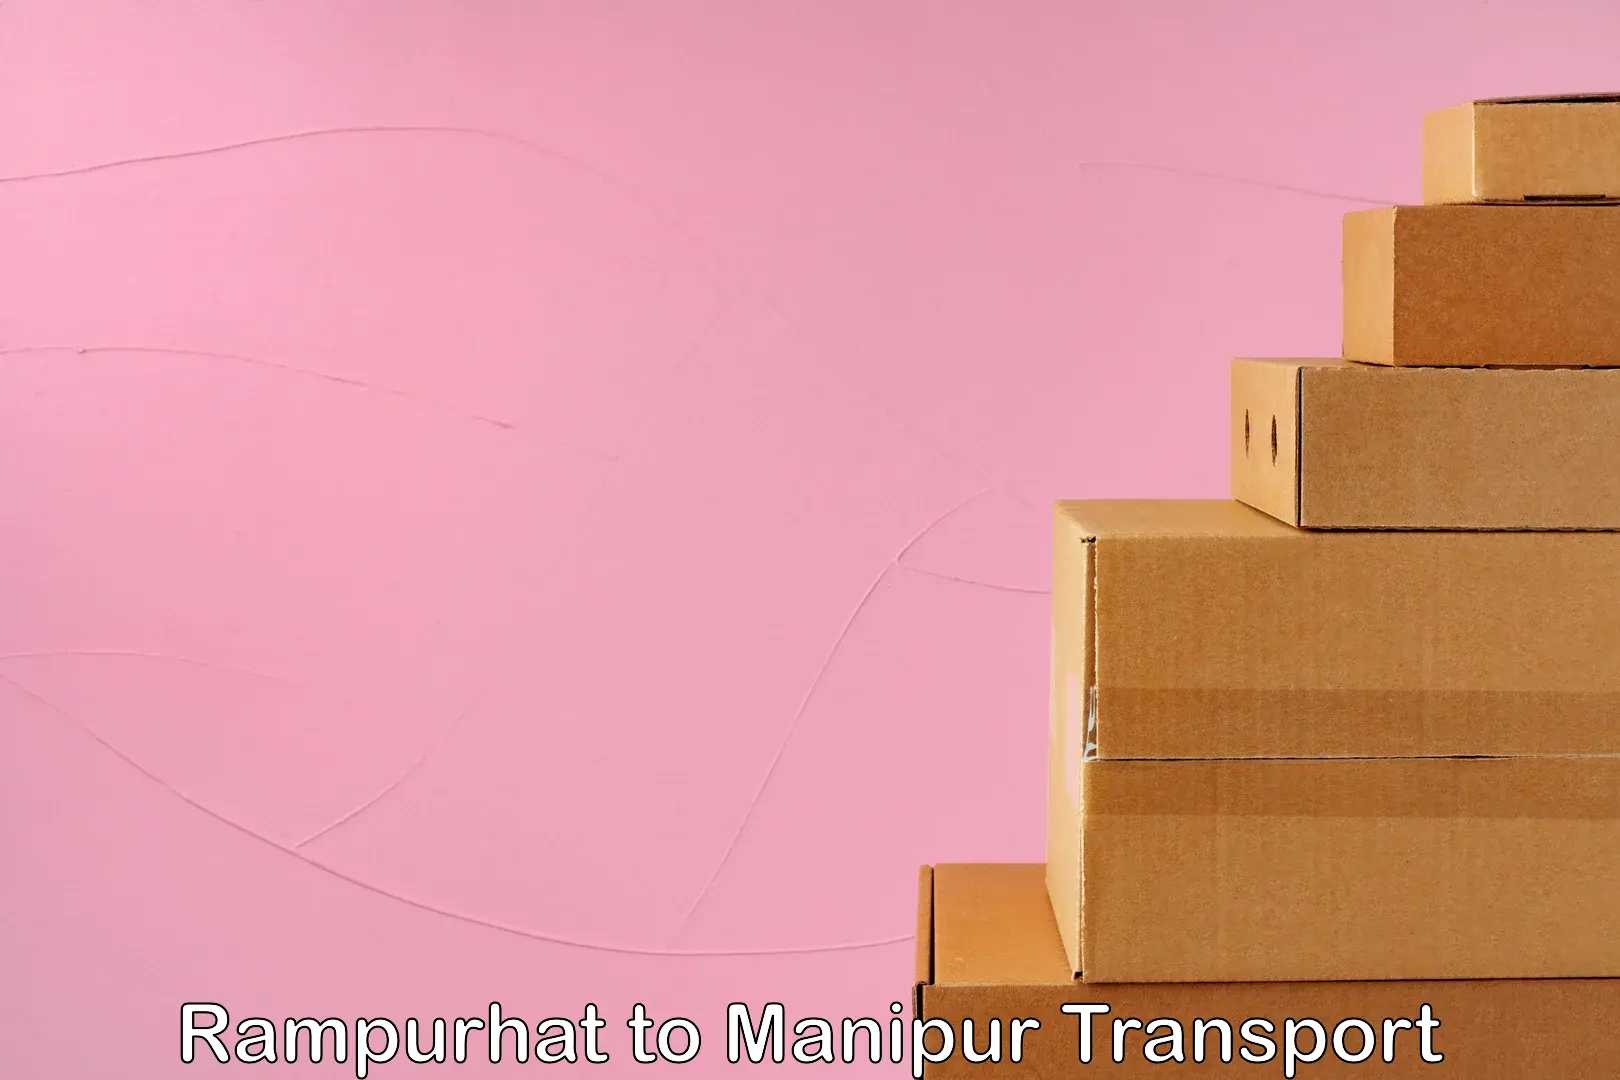 Express transport services in Rampurhat to Manipur